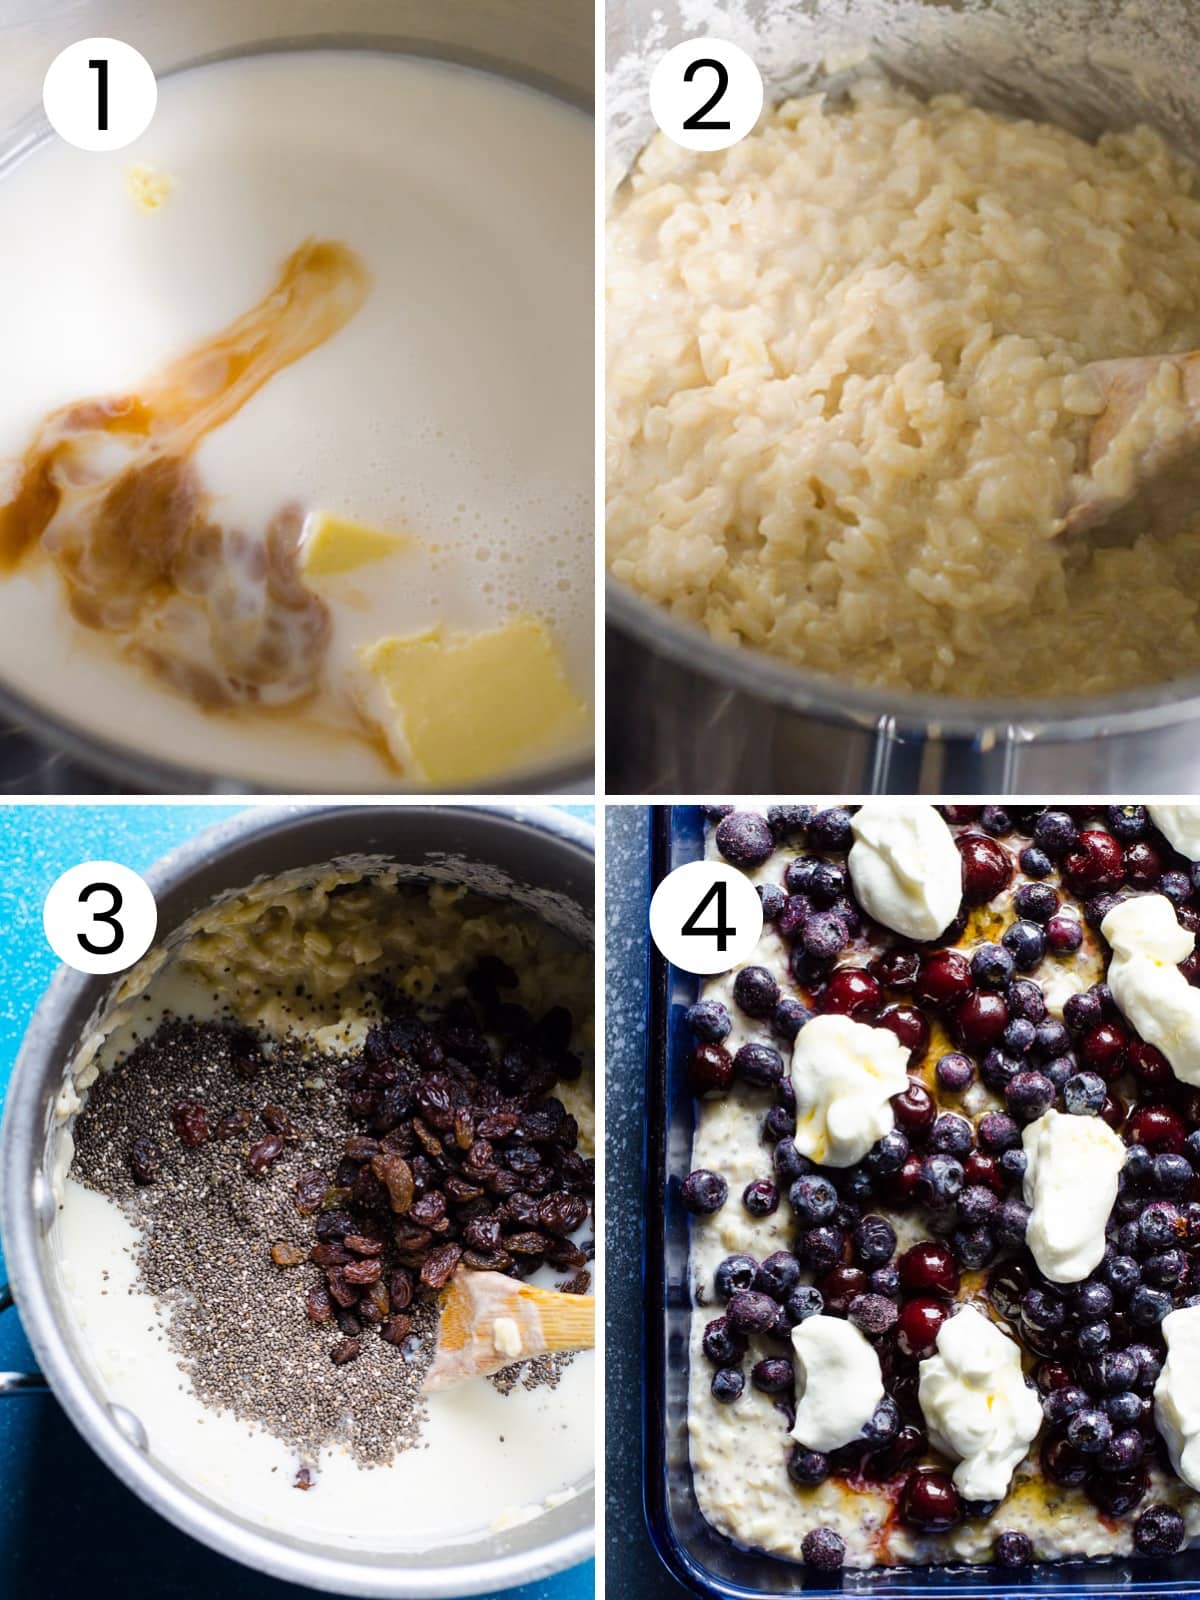 Step by step process how to make brown rice pudding.